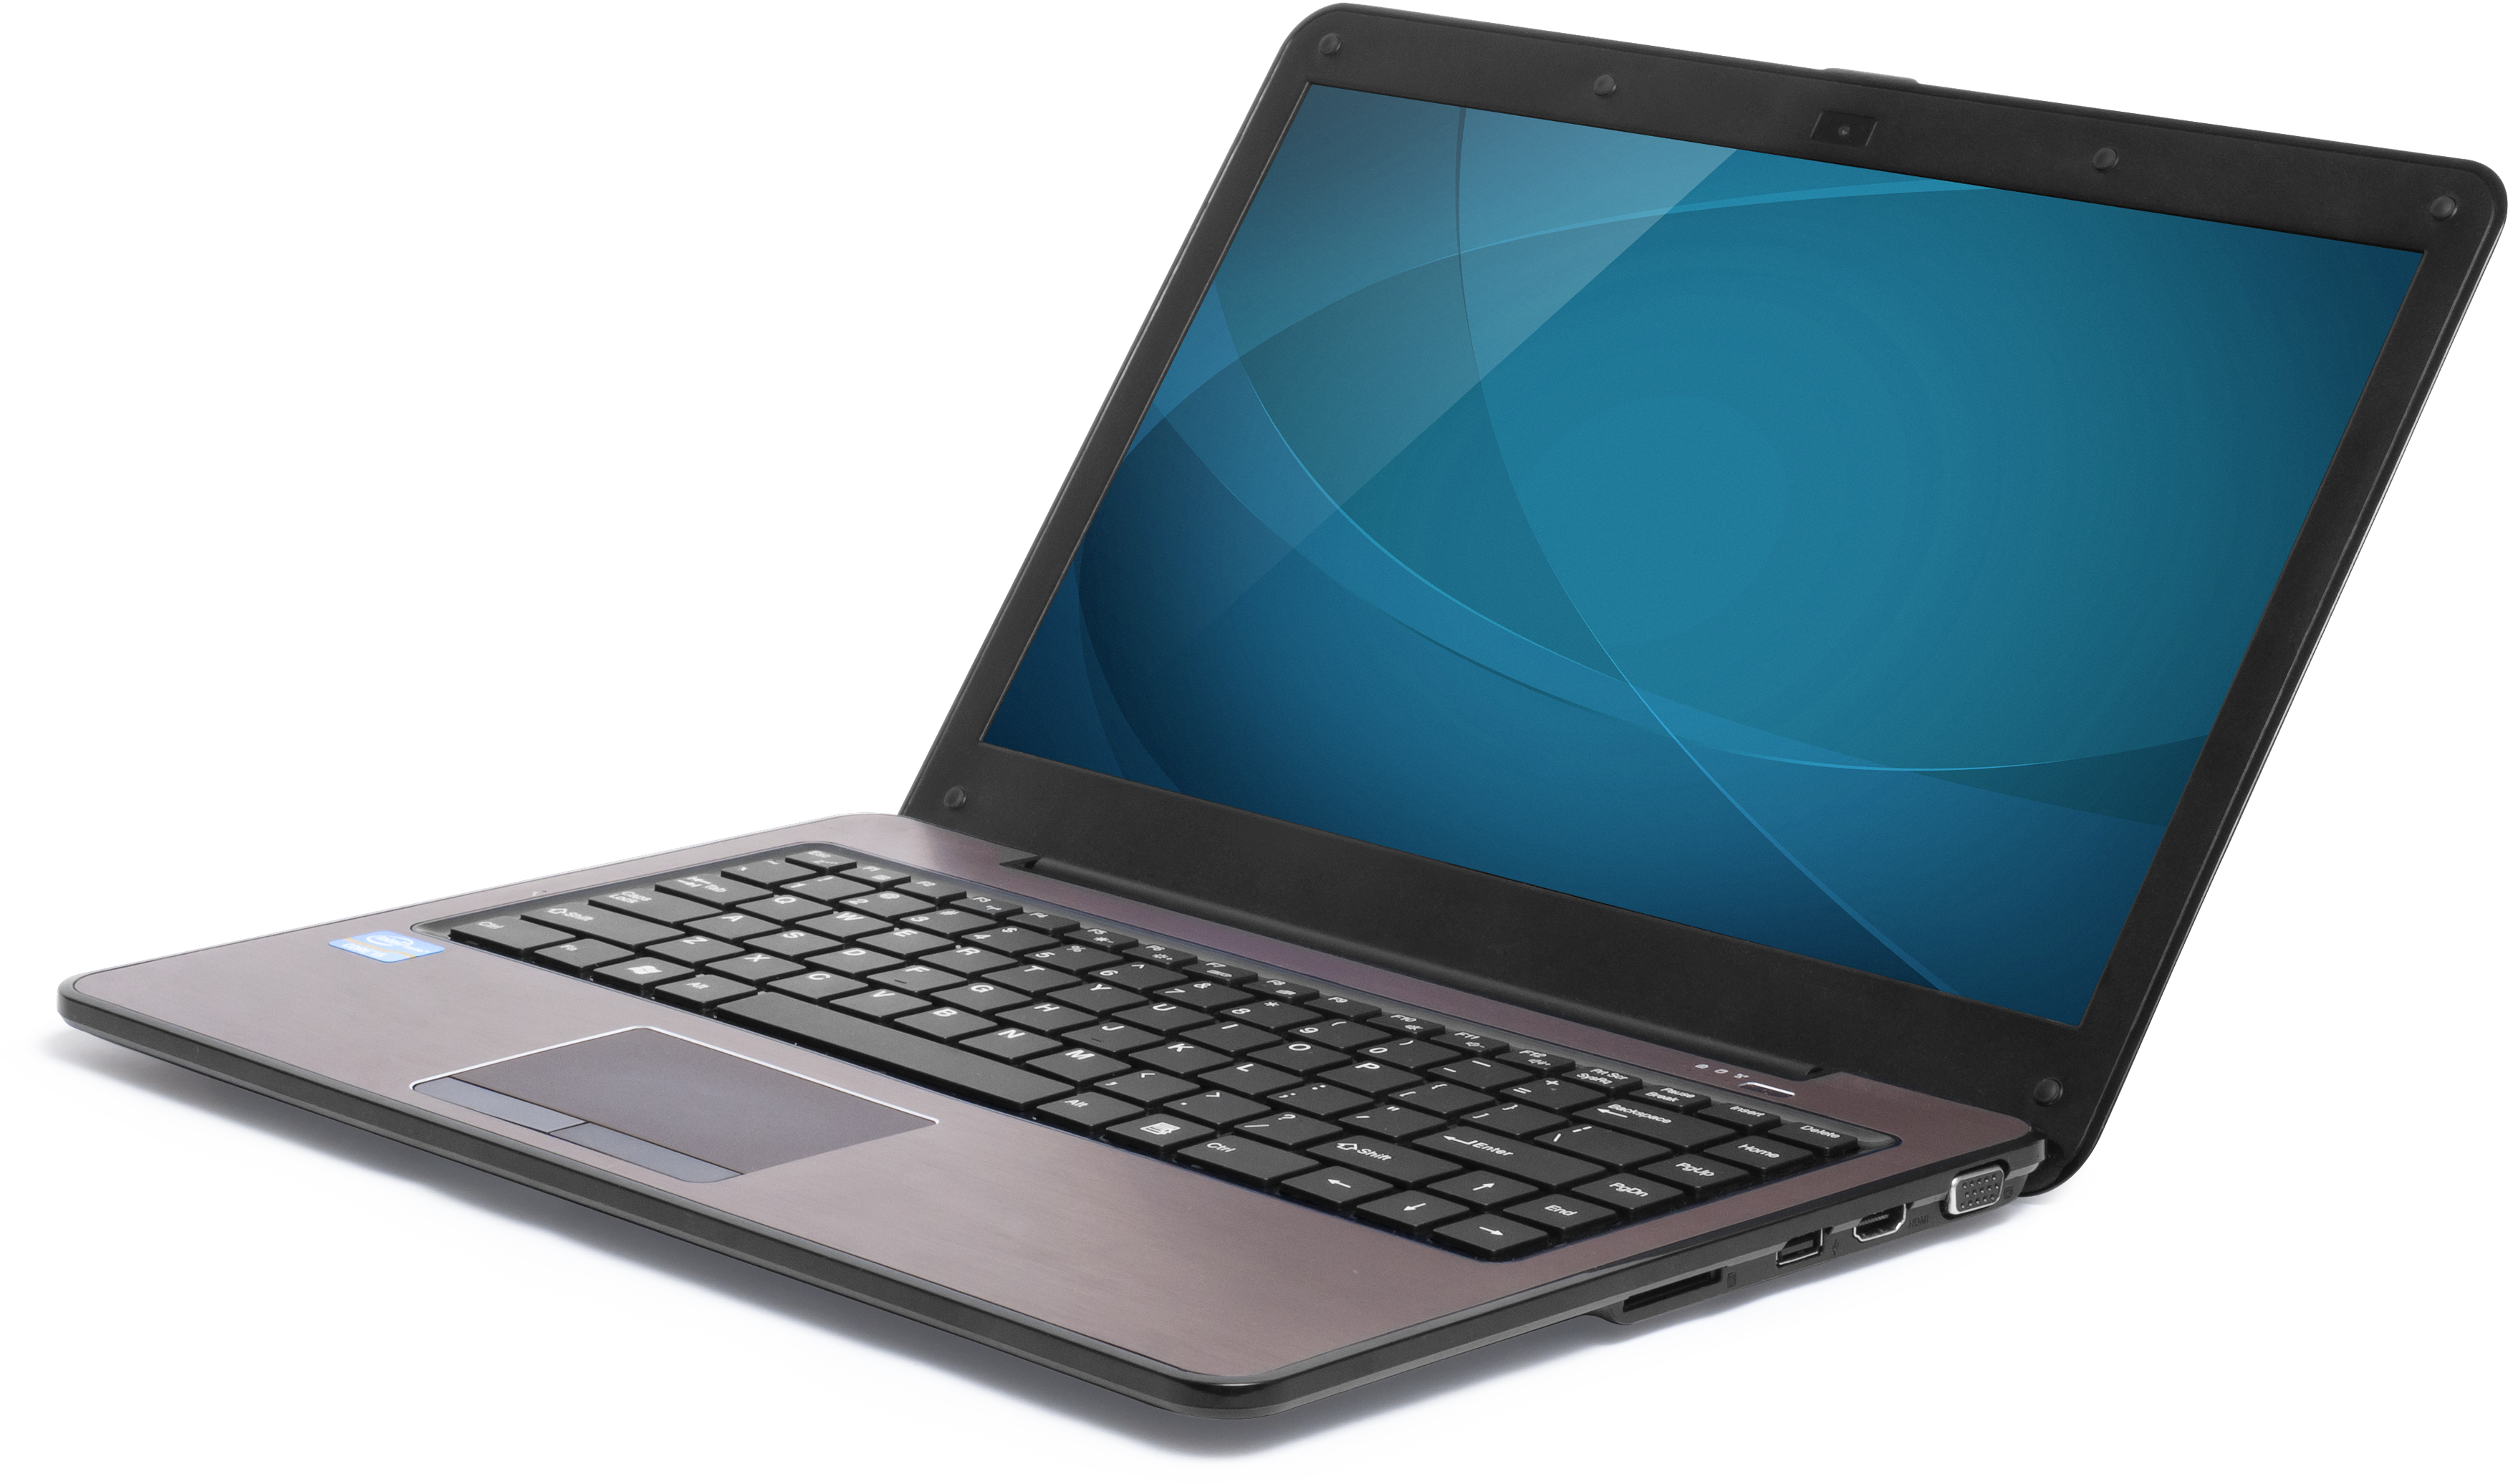 Laptop Images Image Free Download Clipart